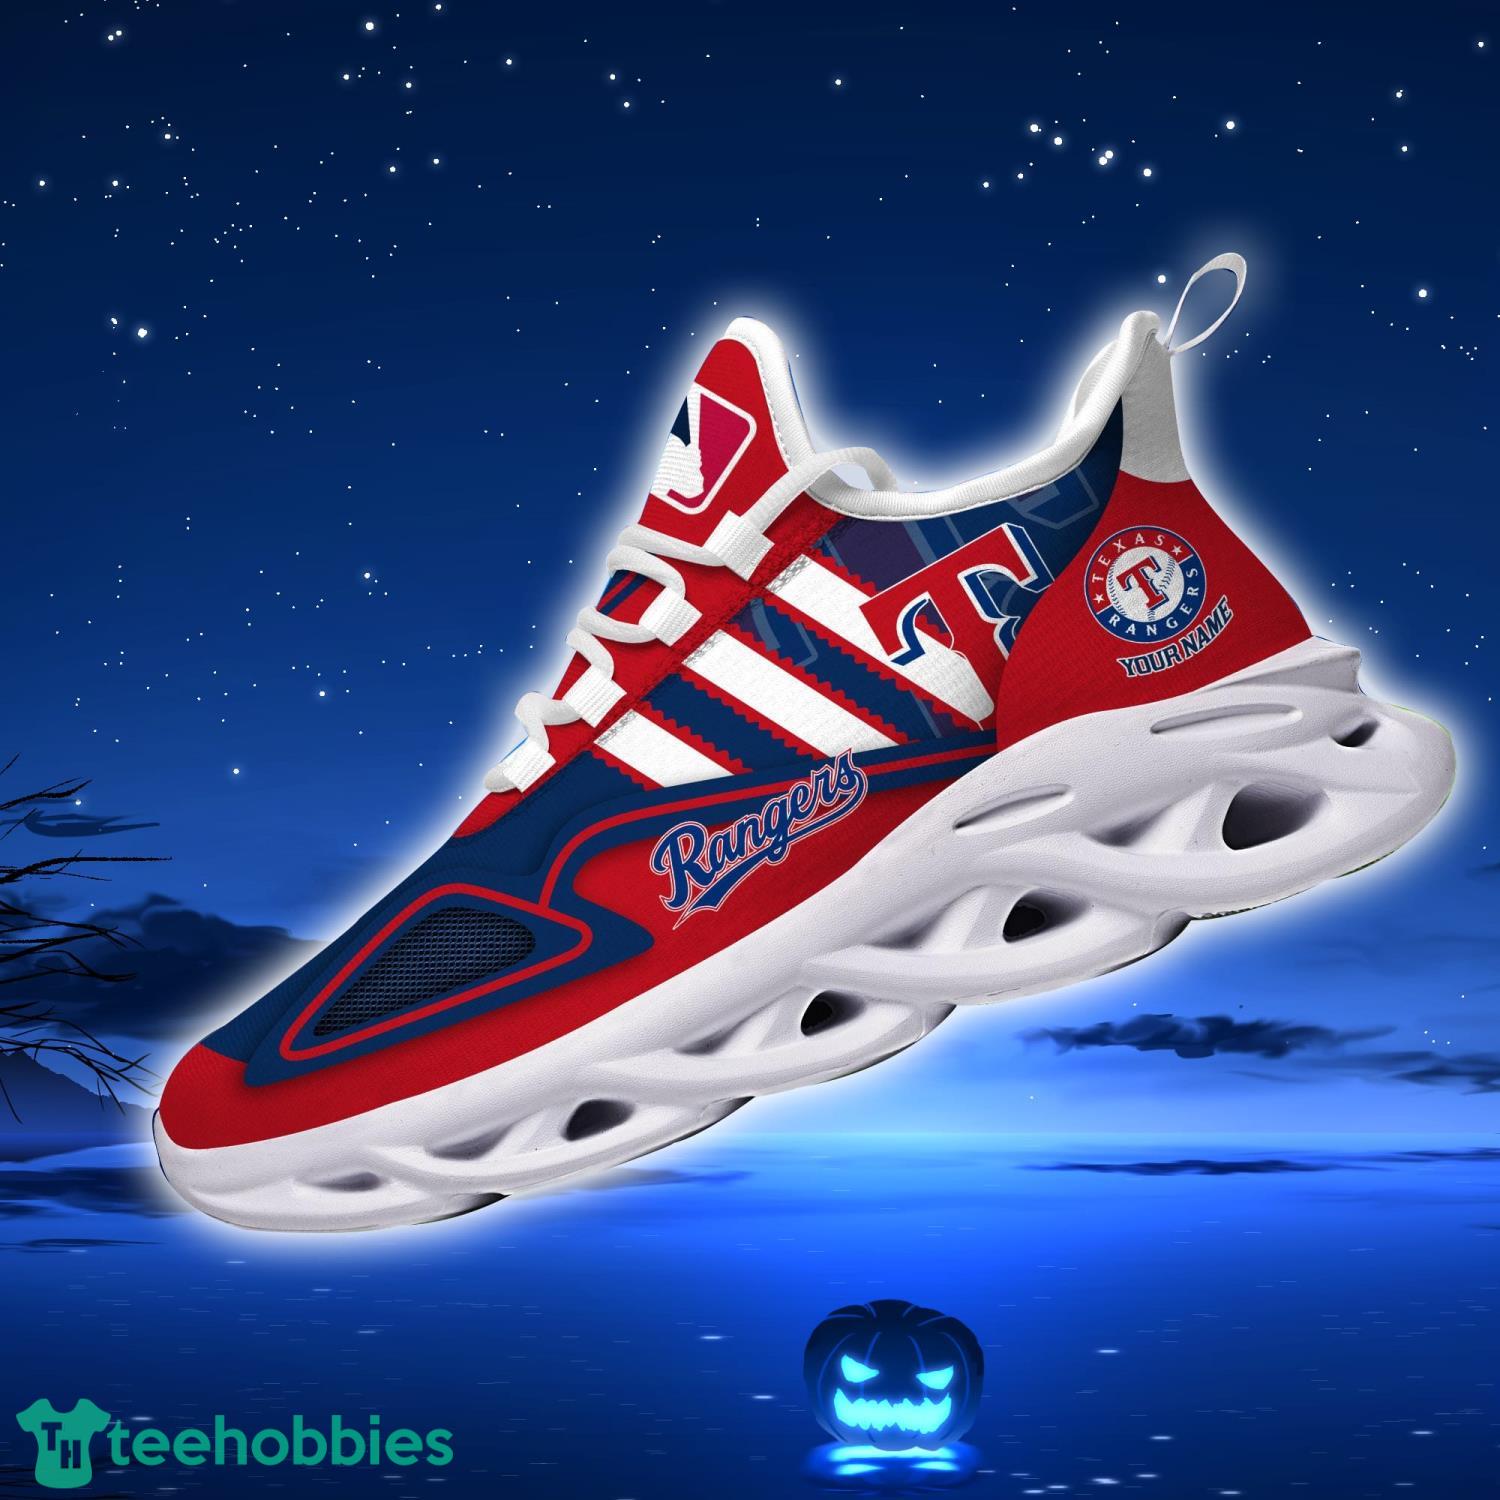 Custom Name Shoes Boston Red Sox Striped Max Soul Shoes Sport Sneakers -  Banantees